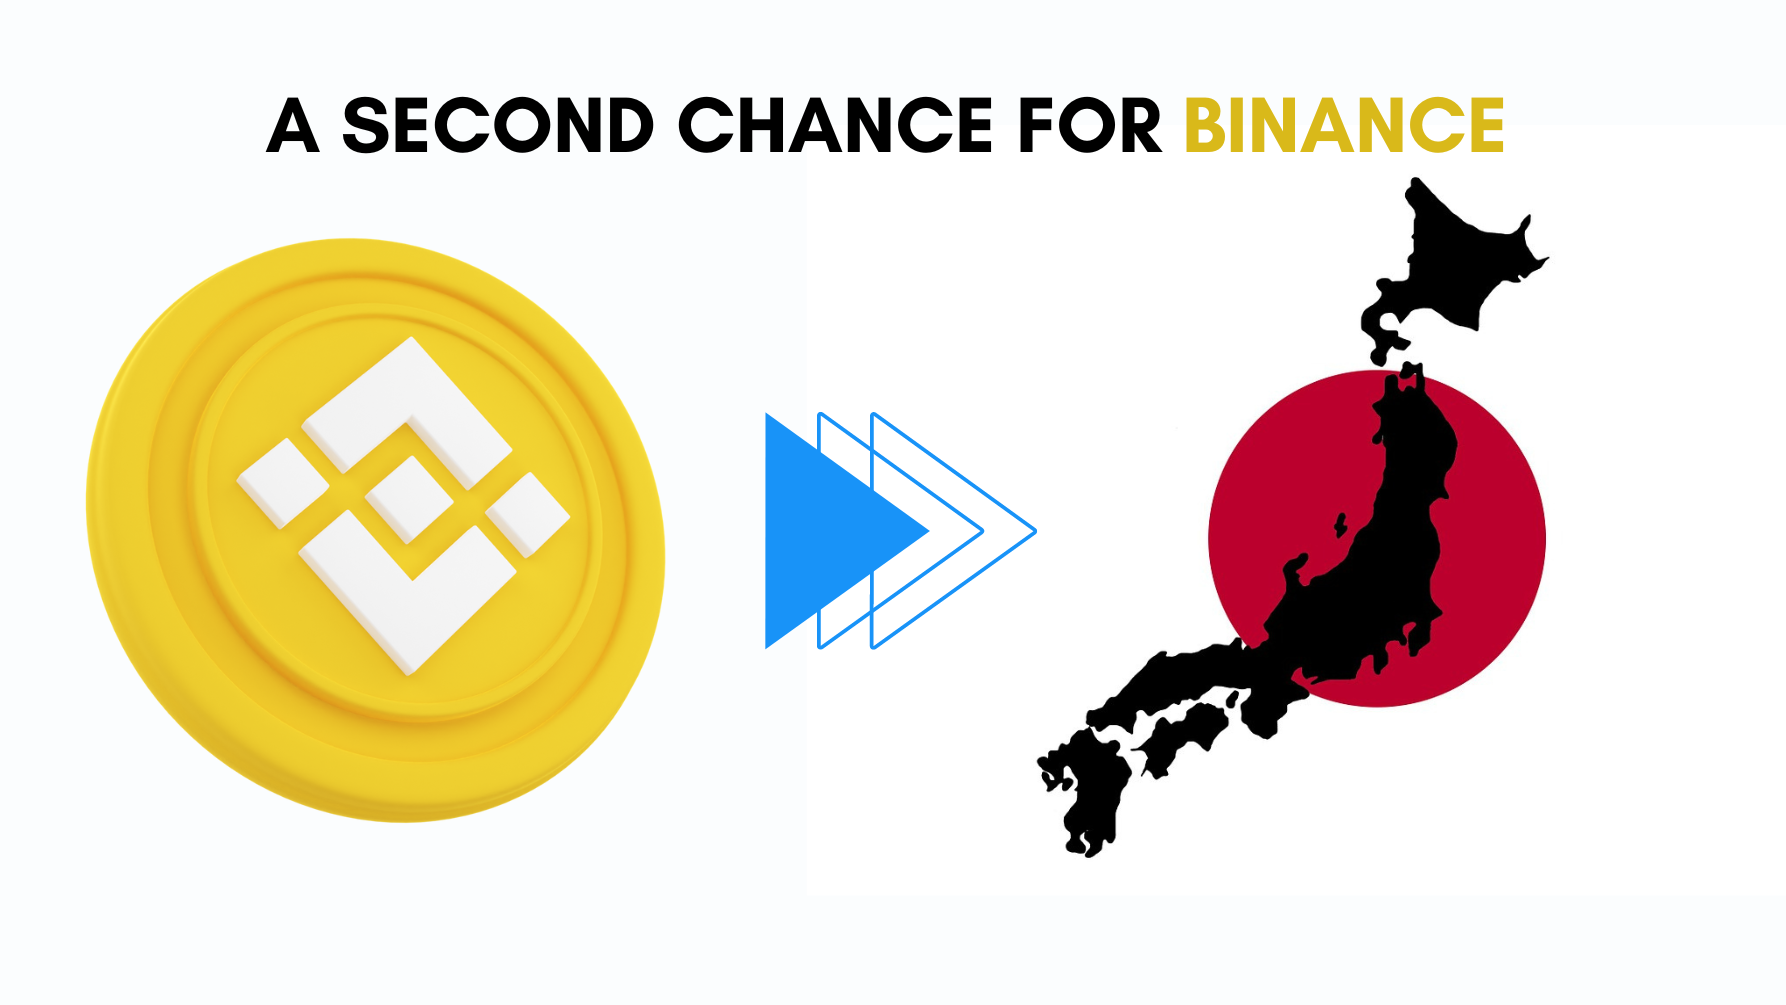 Binance Re-enters Japan After Four Years